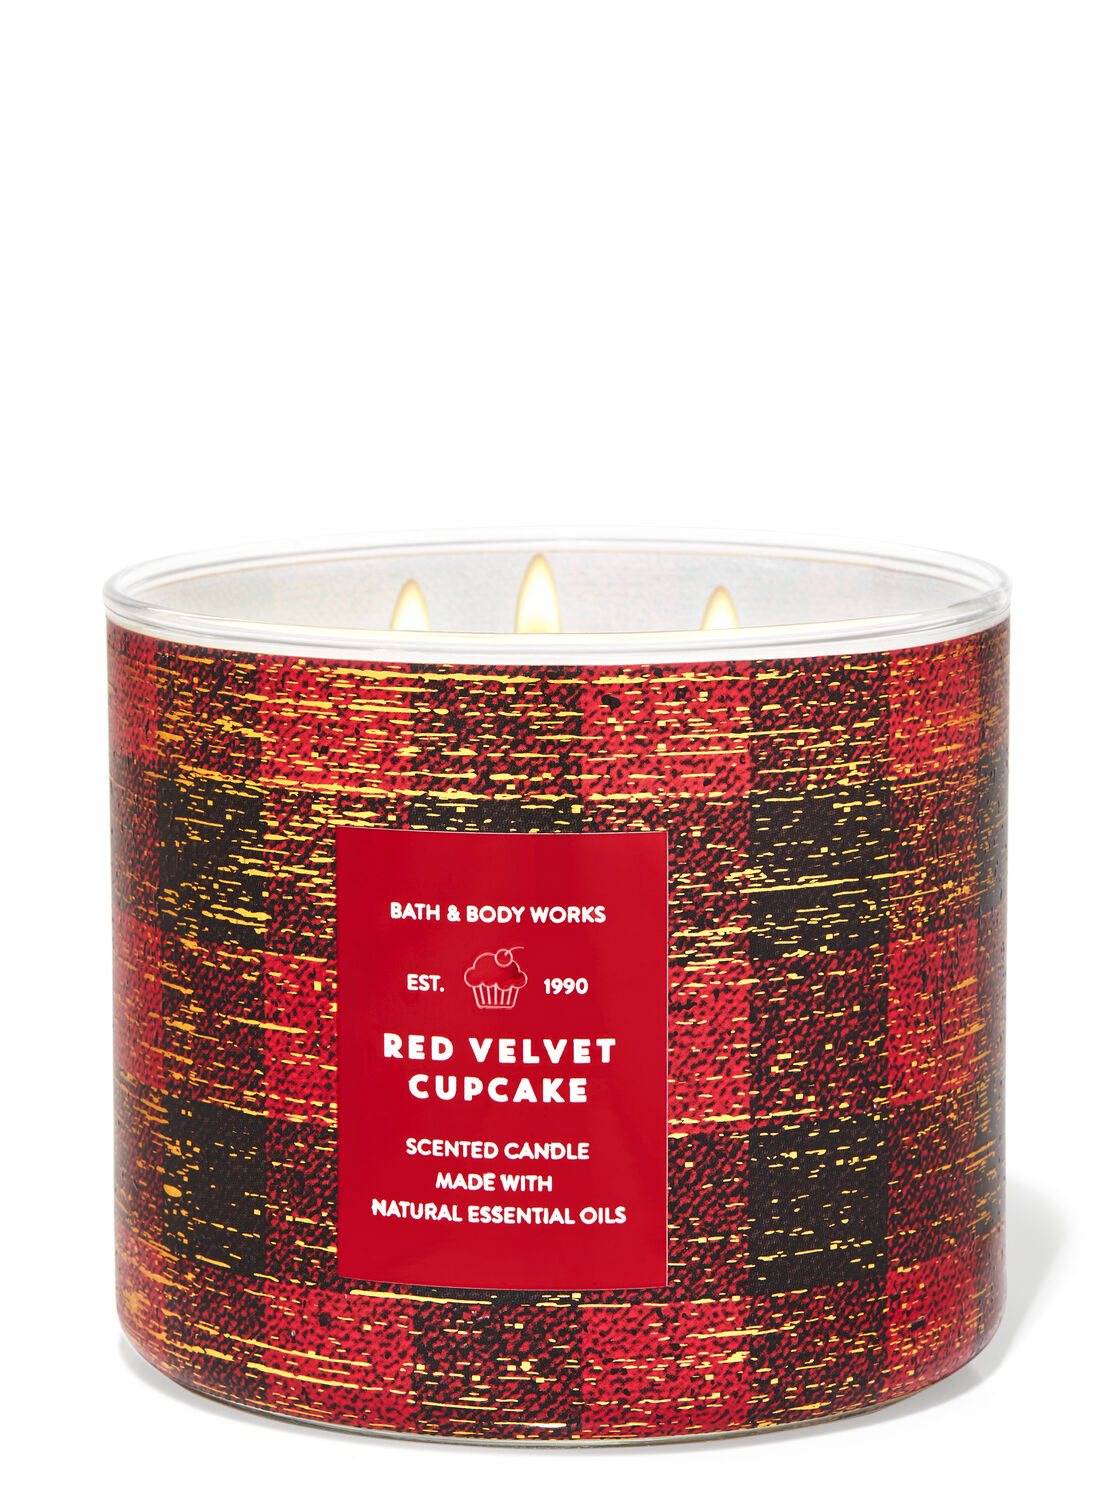 BATH & BODY WORKS 3 WICK 14.5 OZ CANDLE 2016 CHRISTMAS RED VELVET CUPCAKE